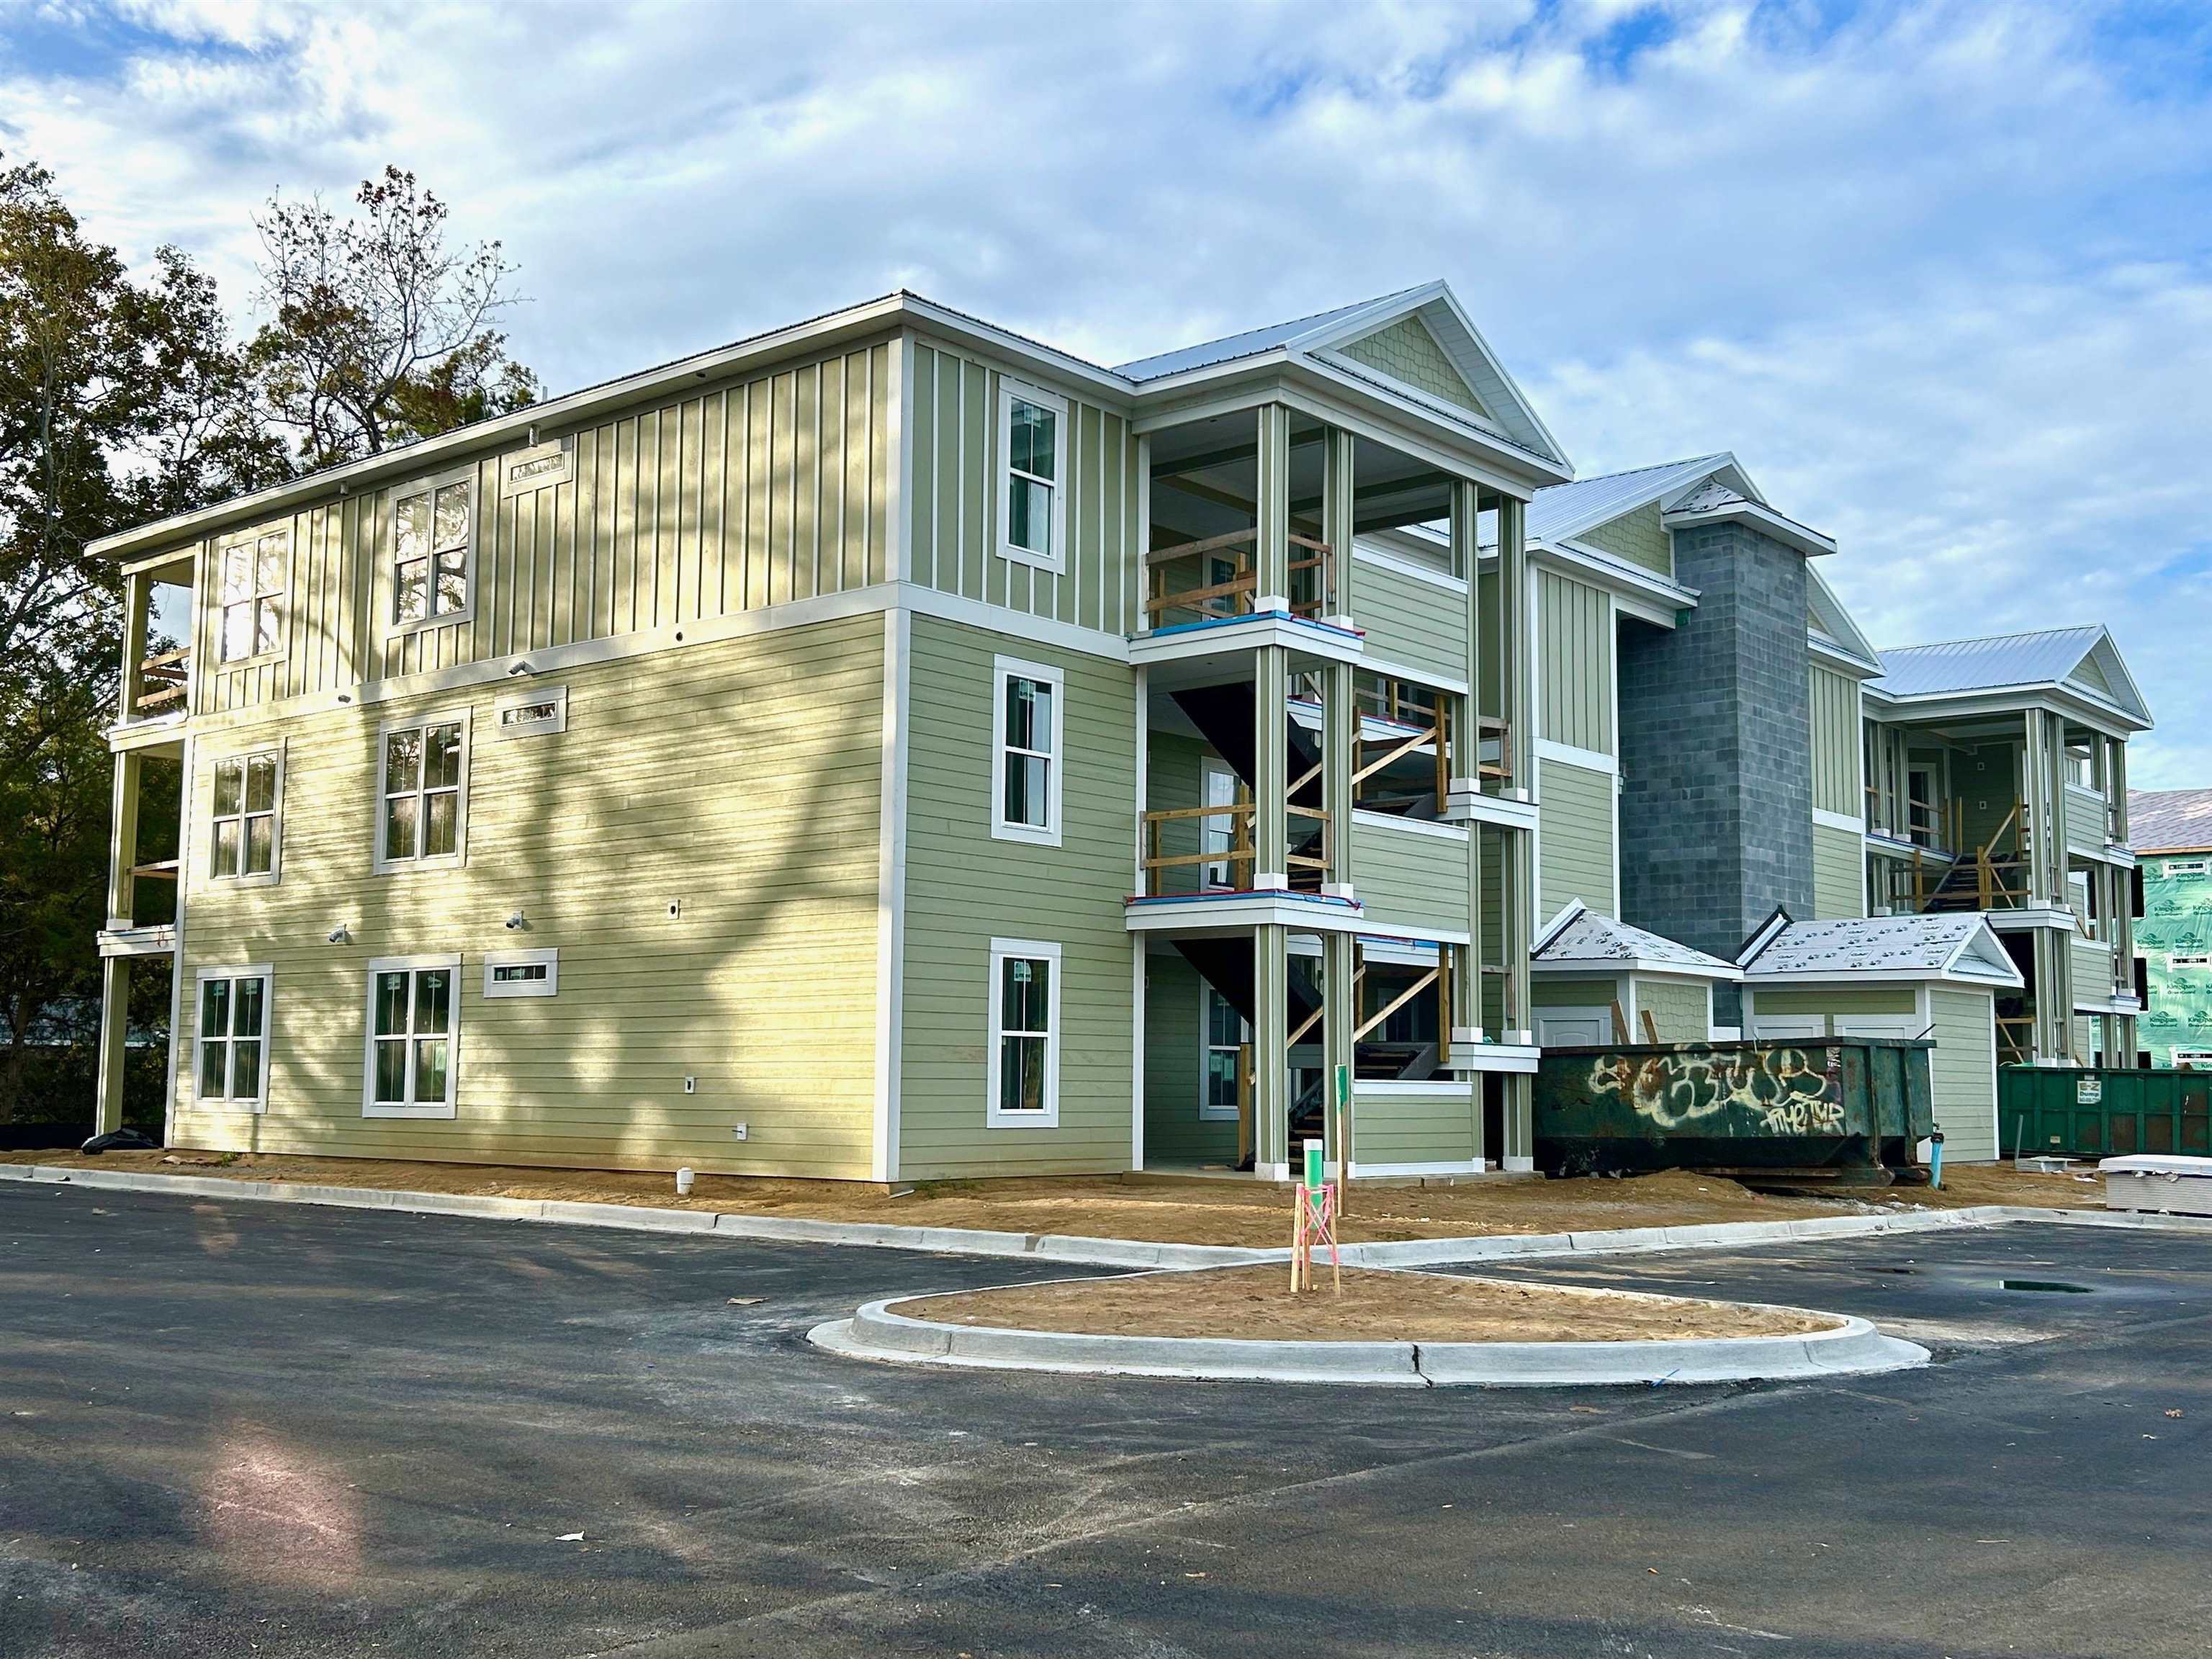 35 Sunny Side Ave. UNIT 3-A Murrells Inlet, SC 29576